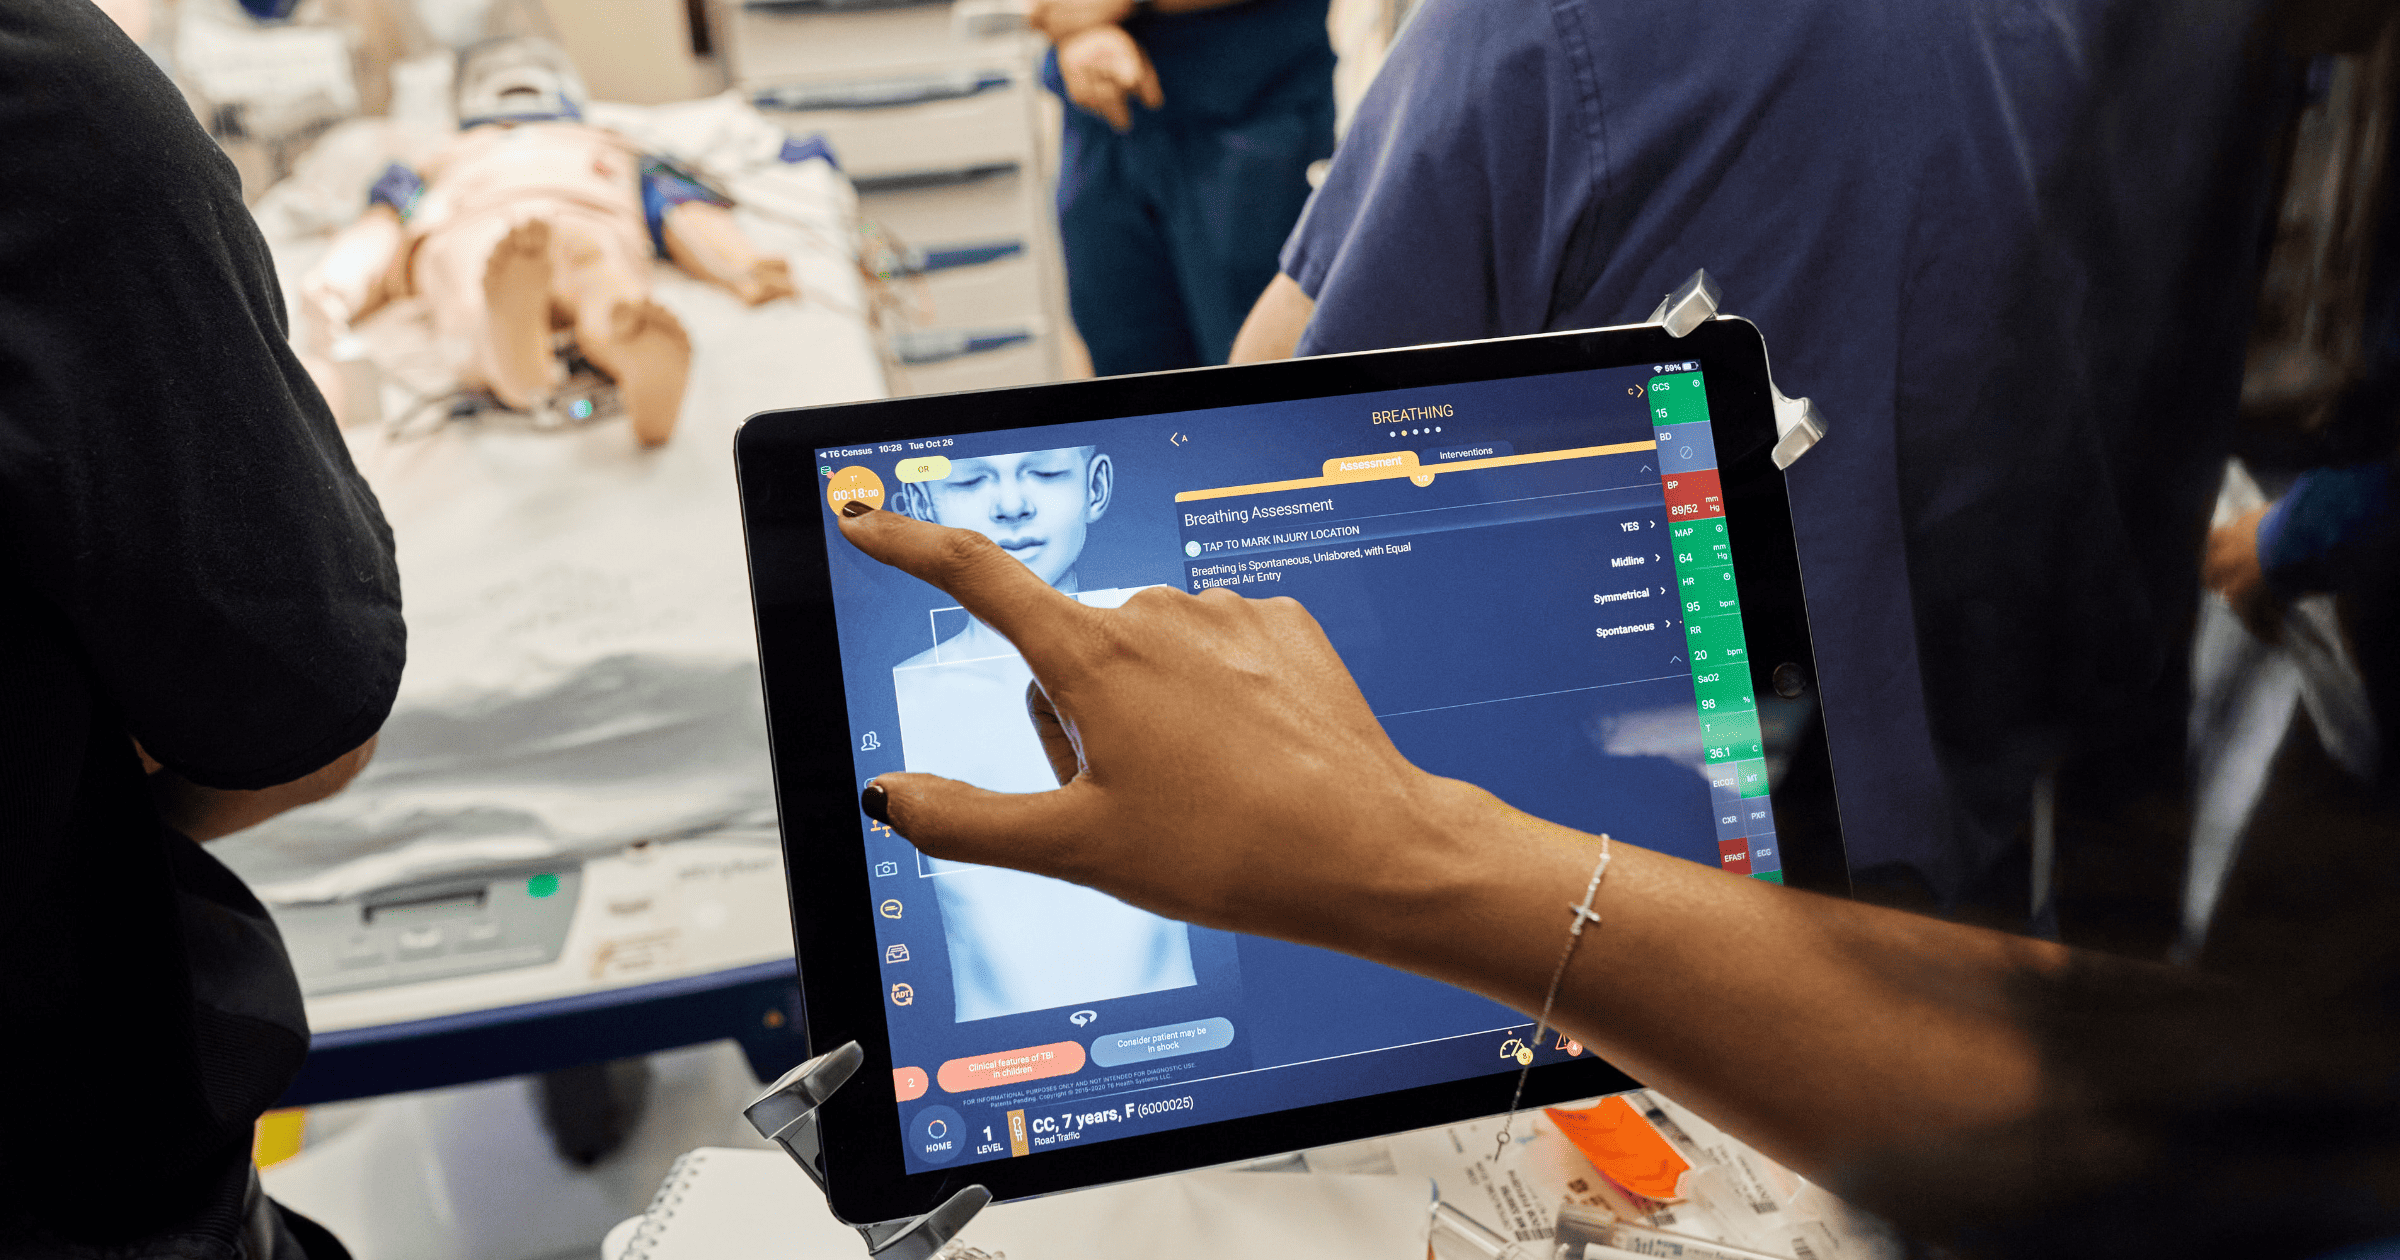 Veterans Use Apple Technology to Update Approach to Trauma Medicine